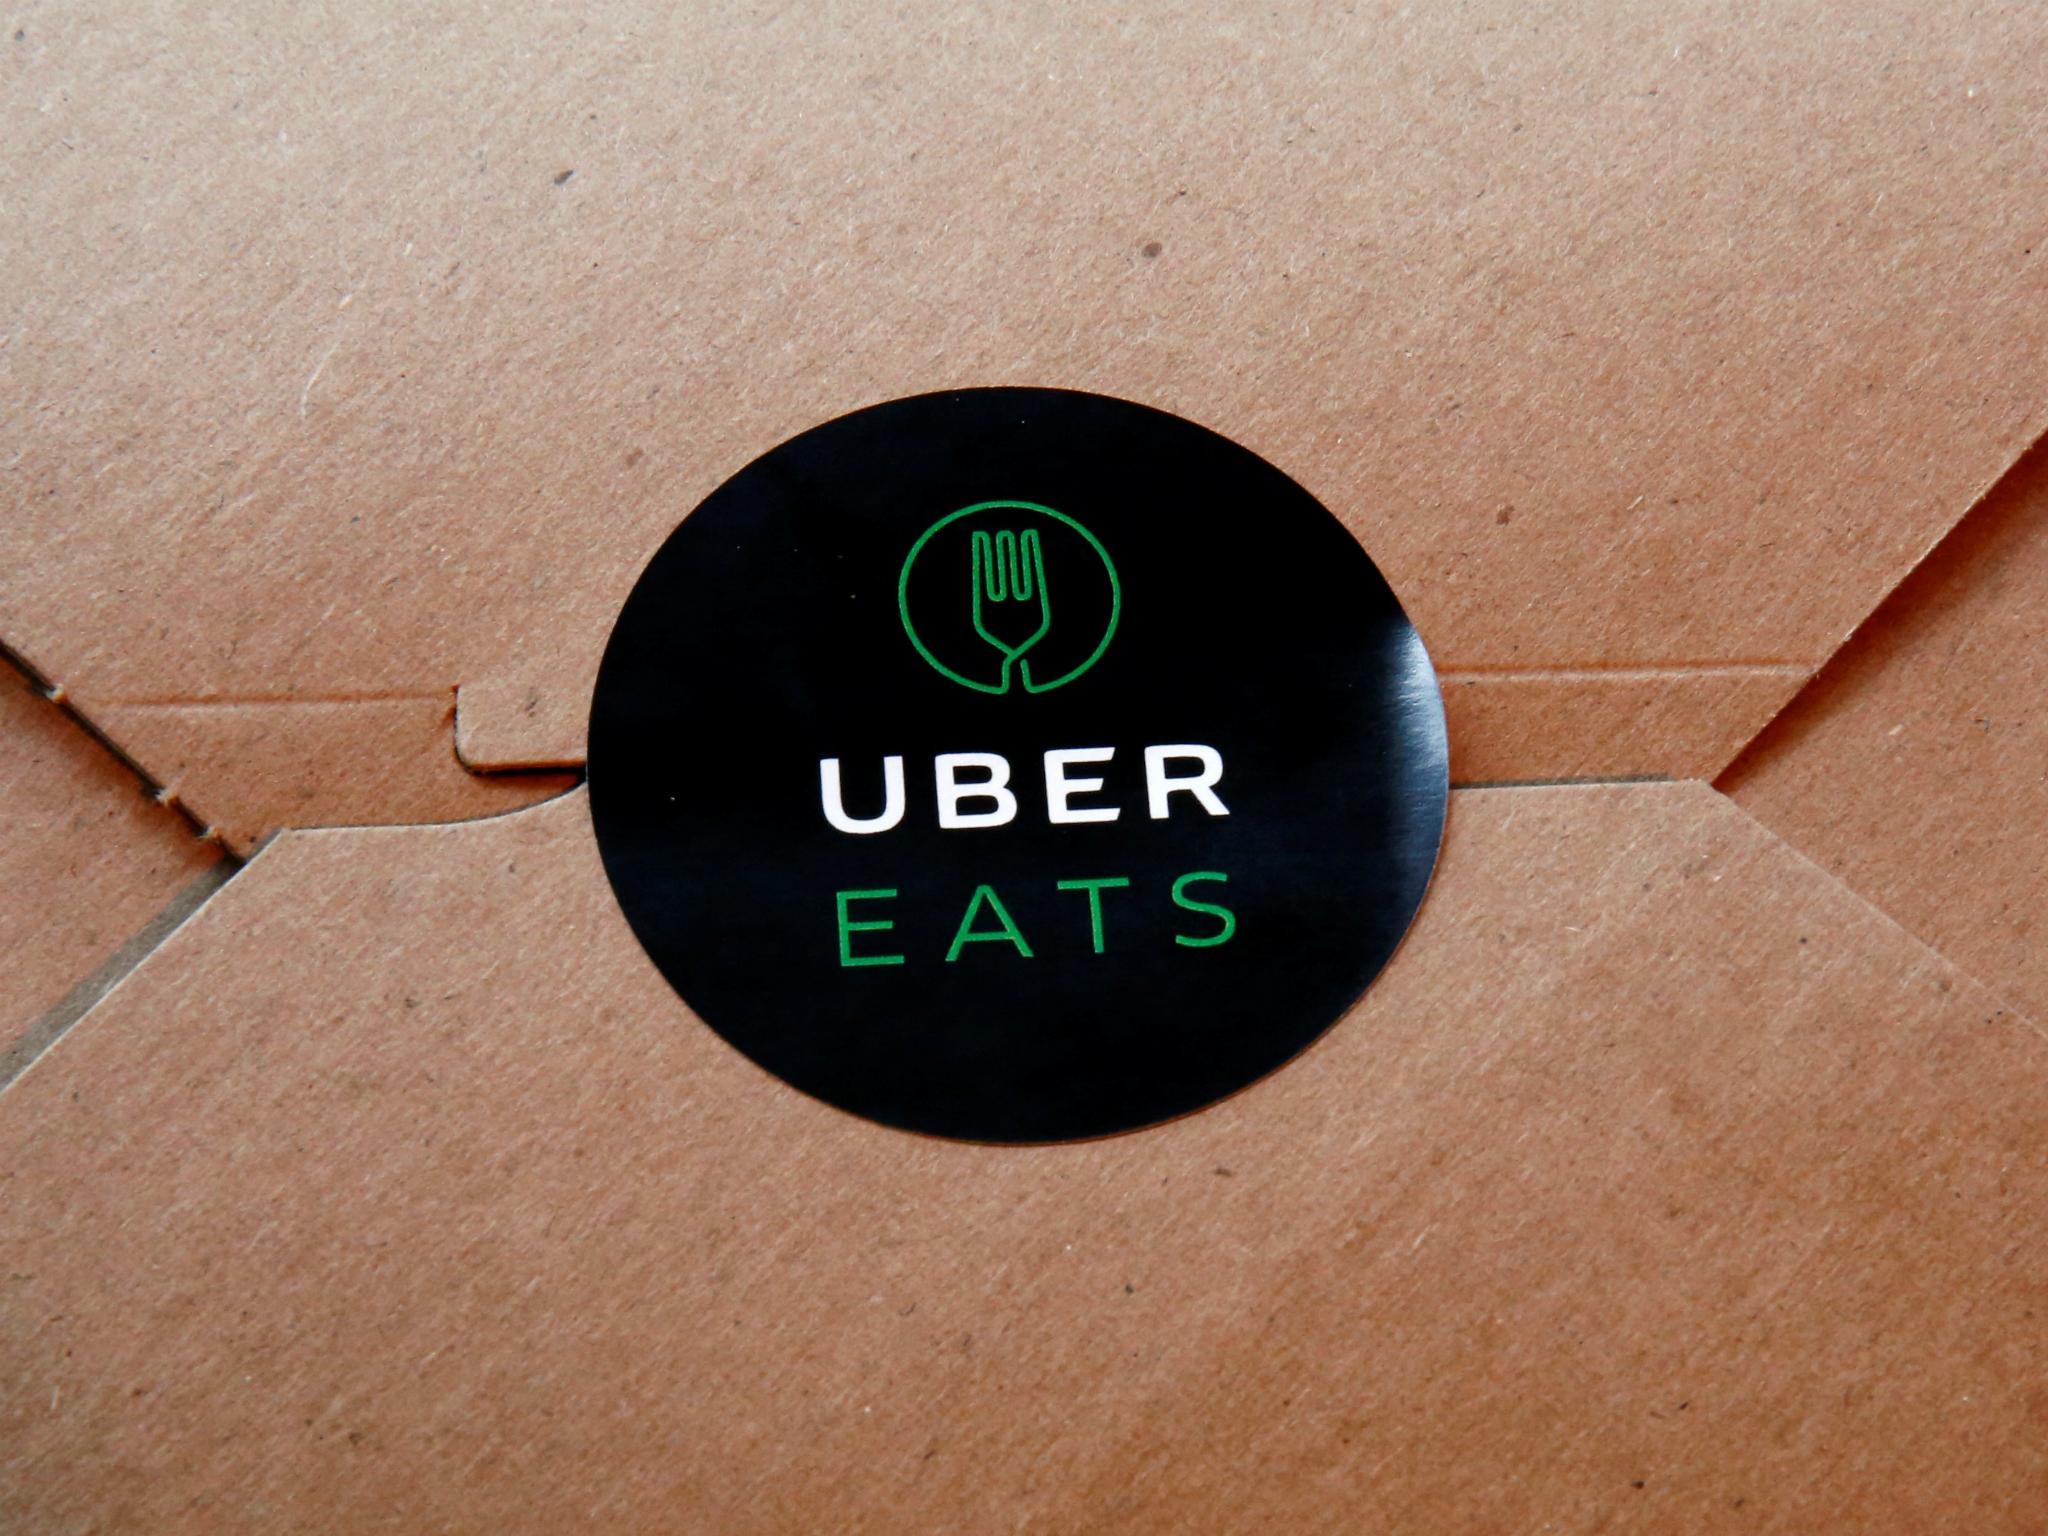 Ubereats was launched in London last year and recently expanded to 40 UK towns and cities